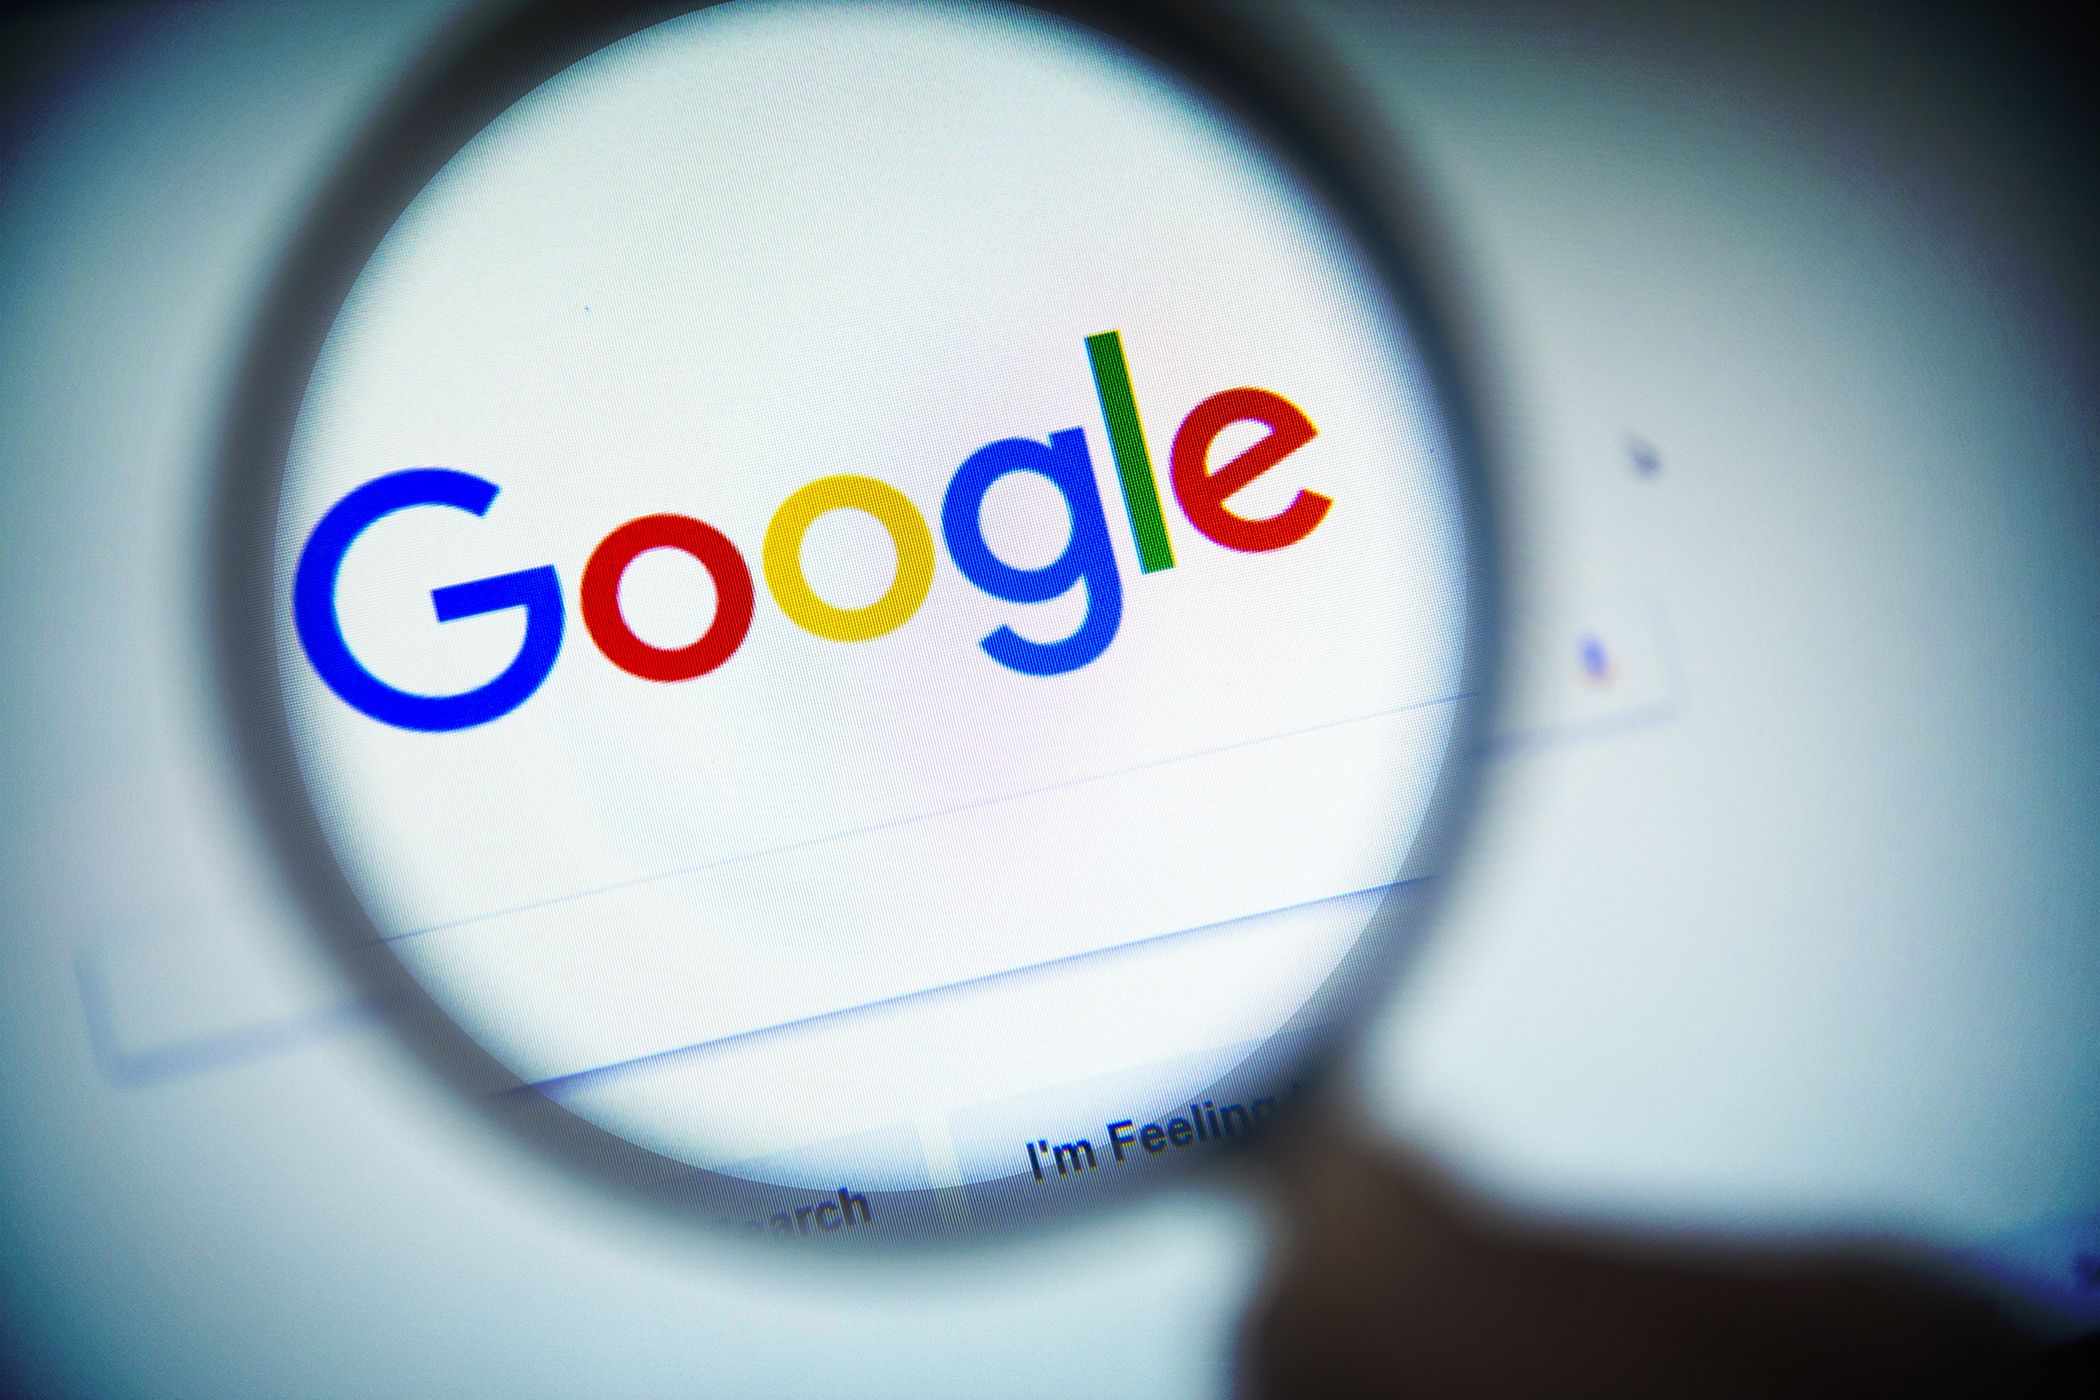 The Google search window being seen through a magnifying glass